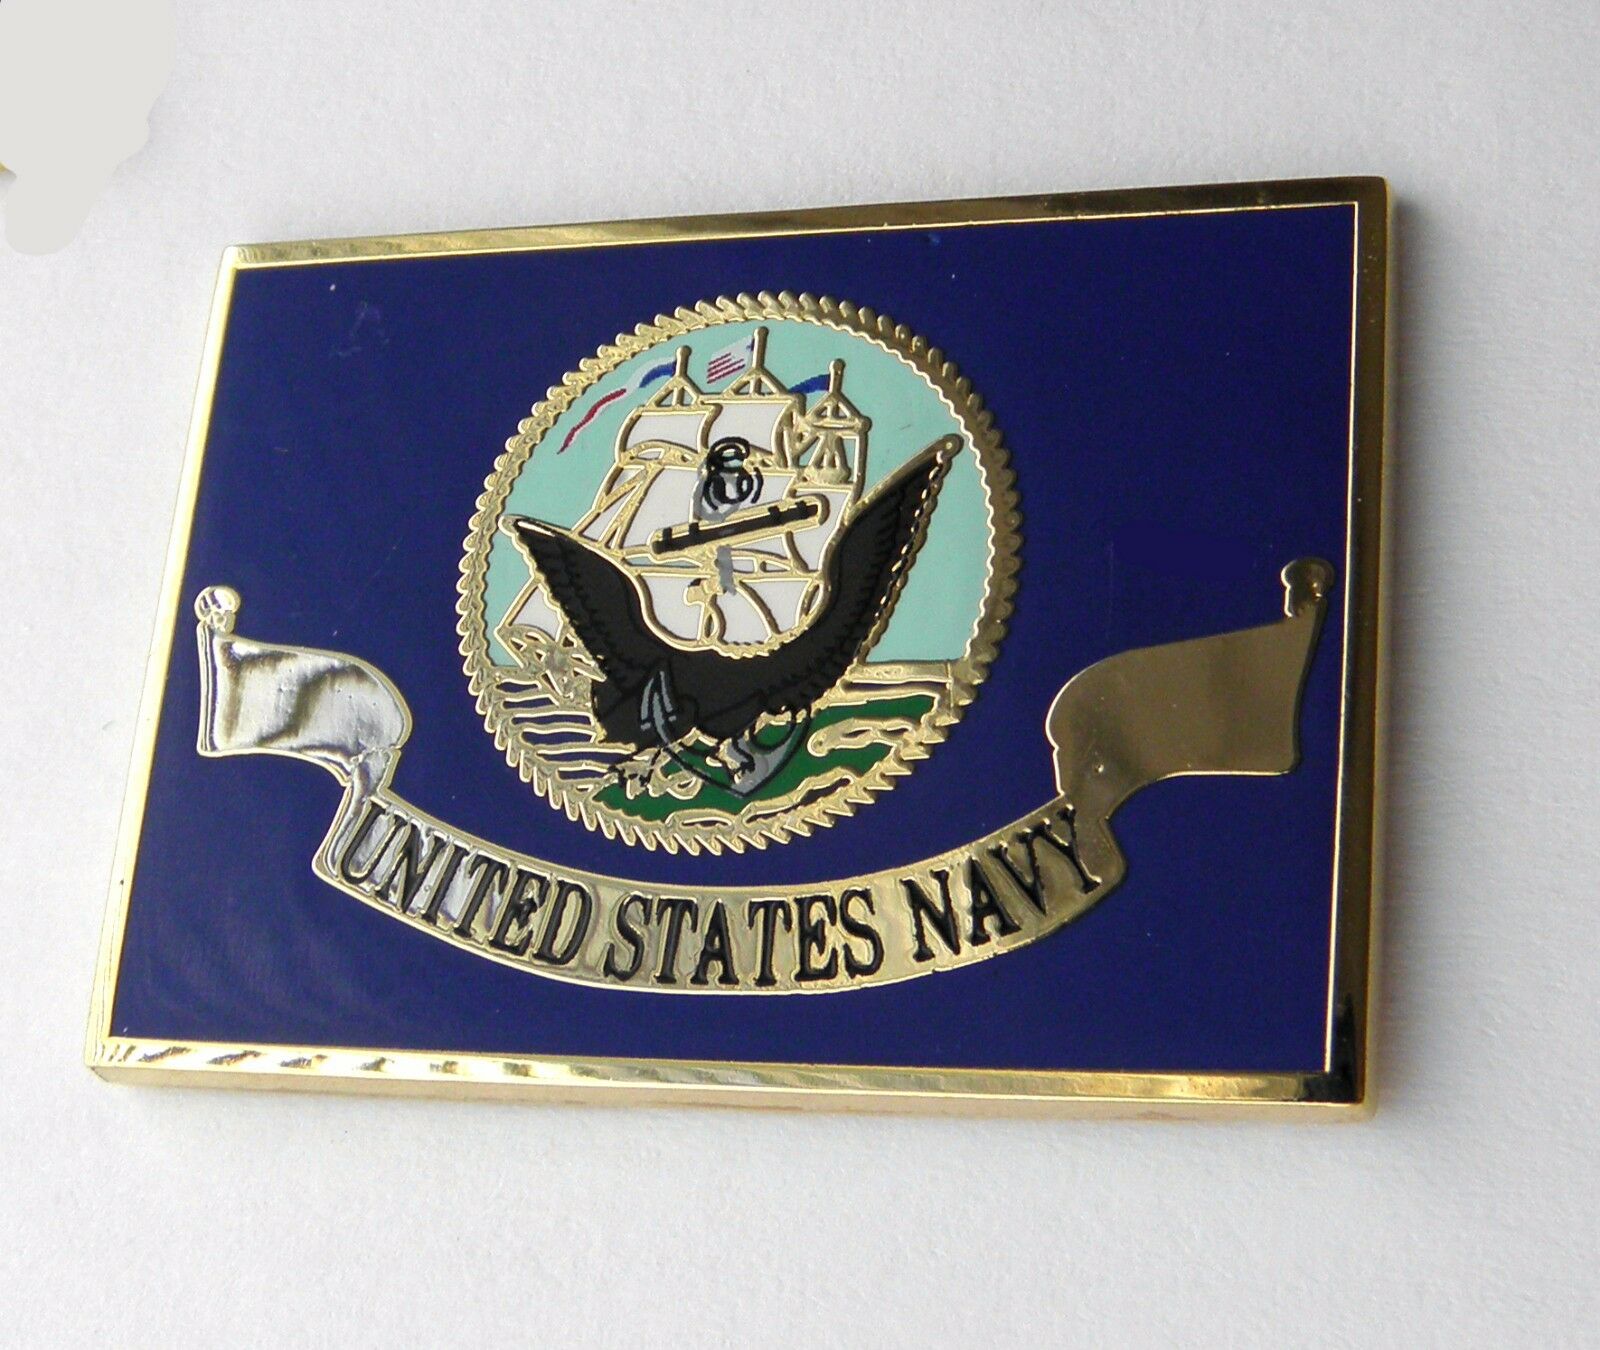 United States Navy with Flag Lapel Pin USNV-1 